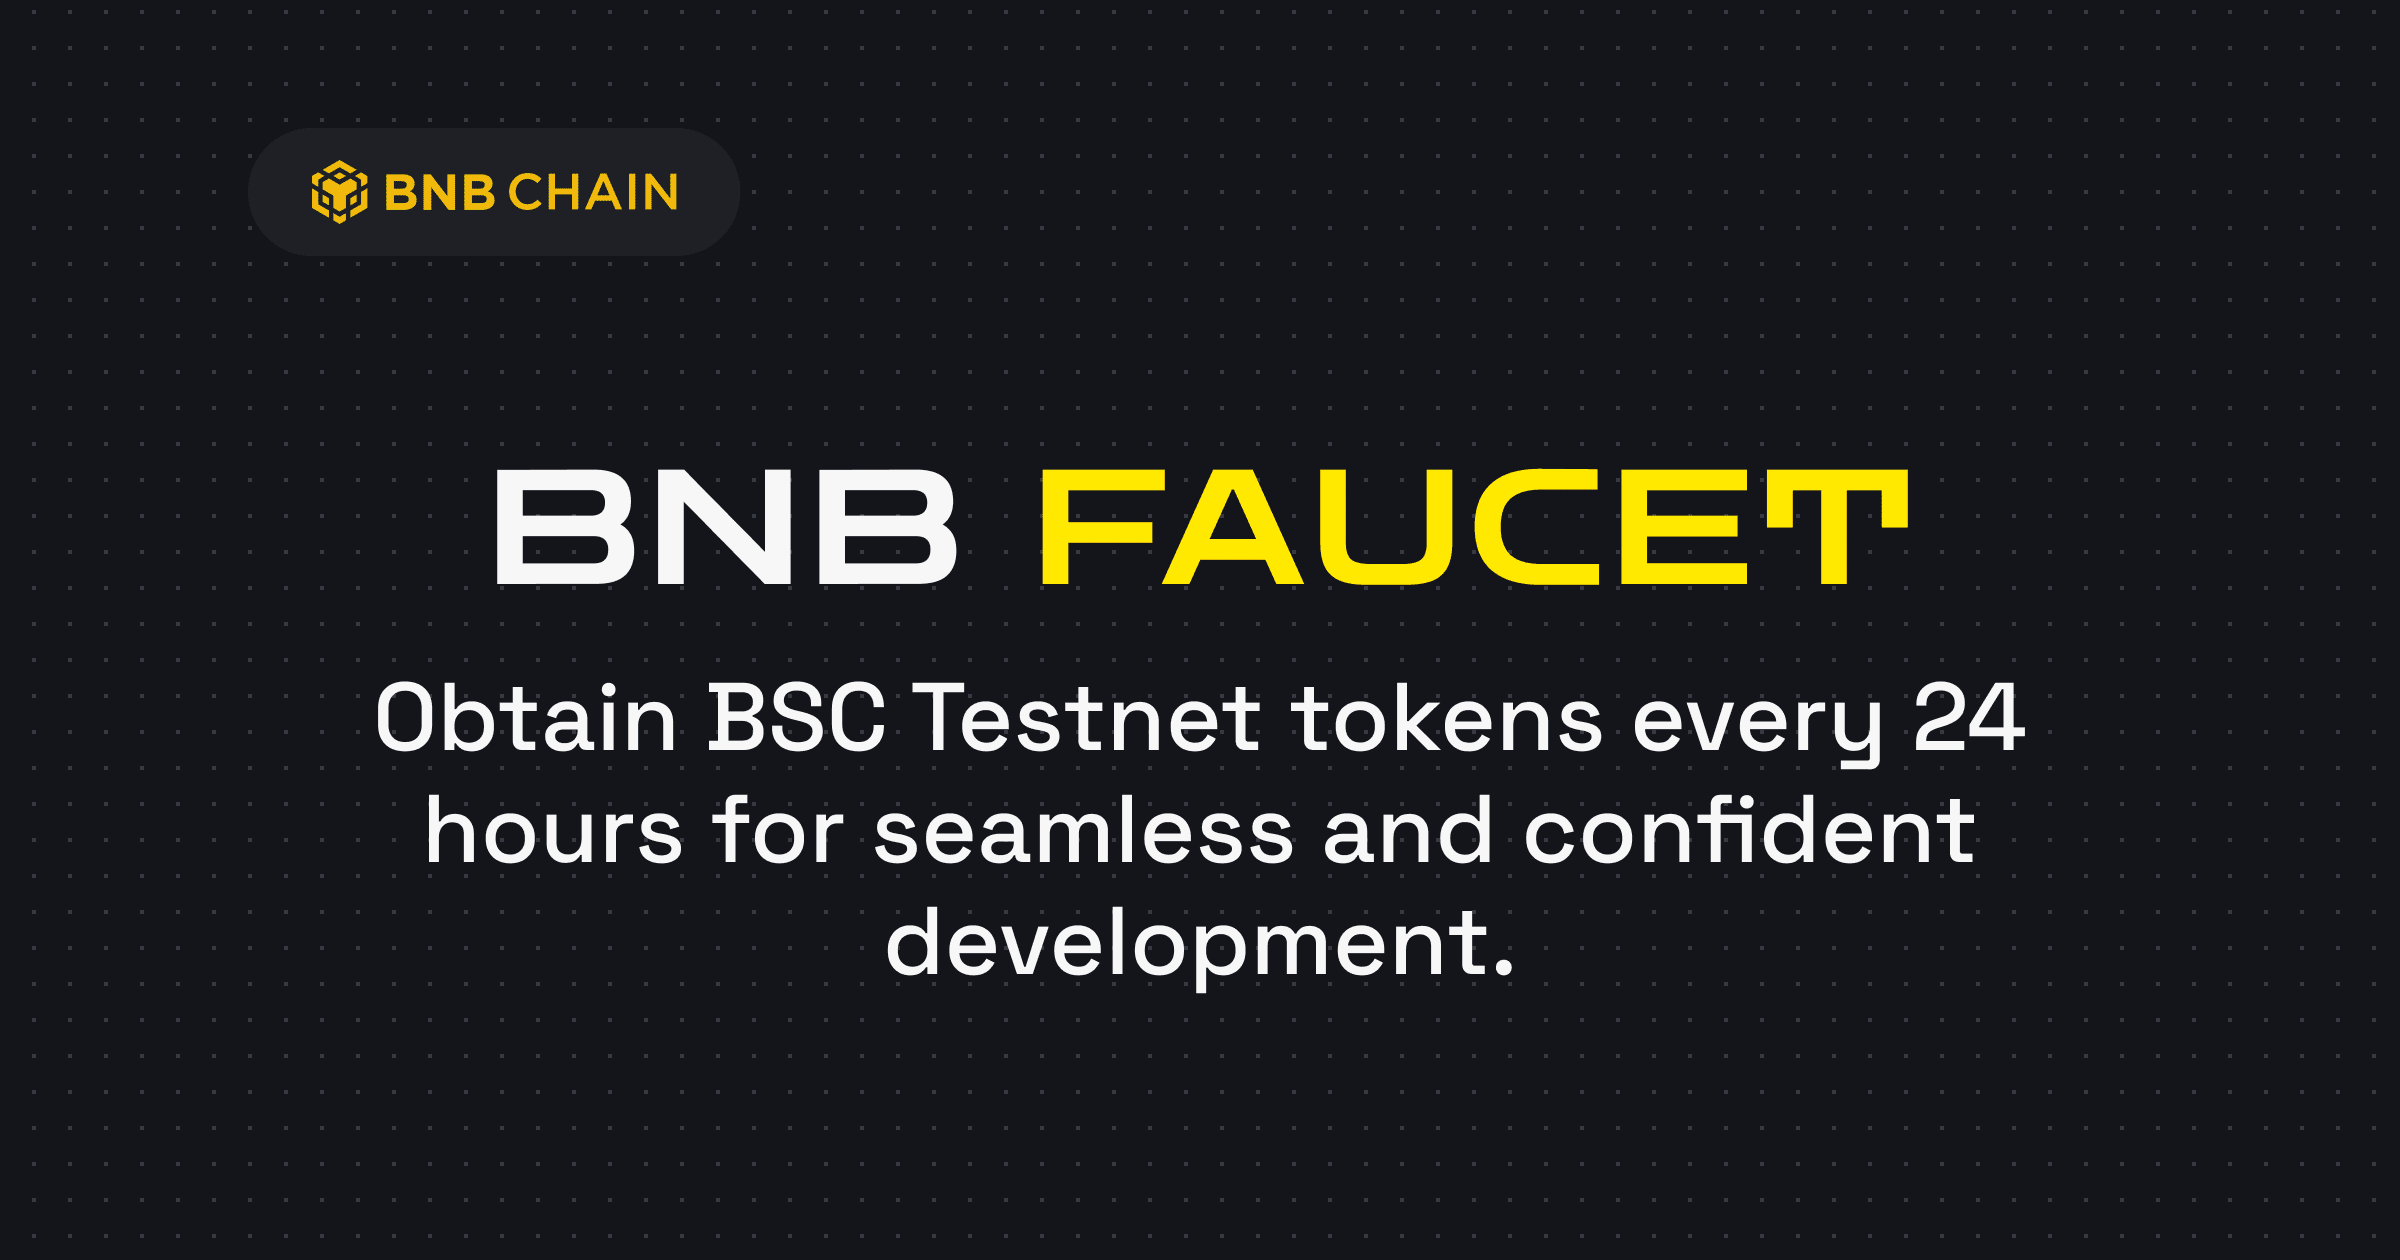 Testnet Faucets - No Signup Required - Moralis Web3